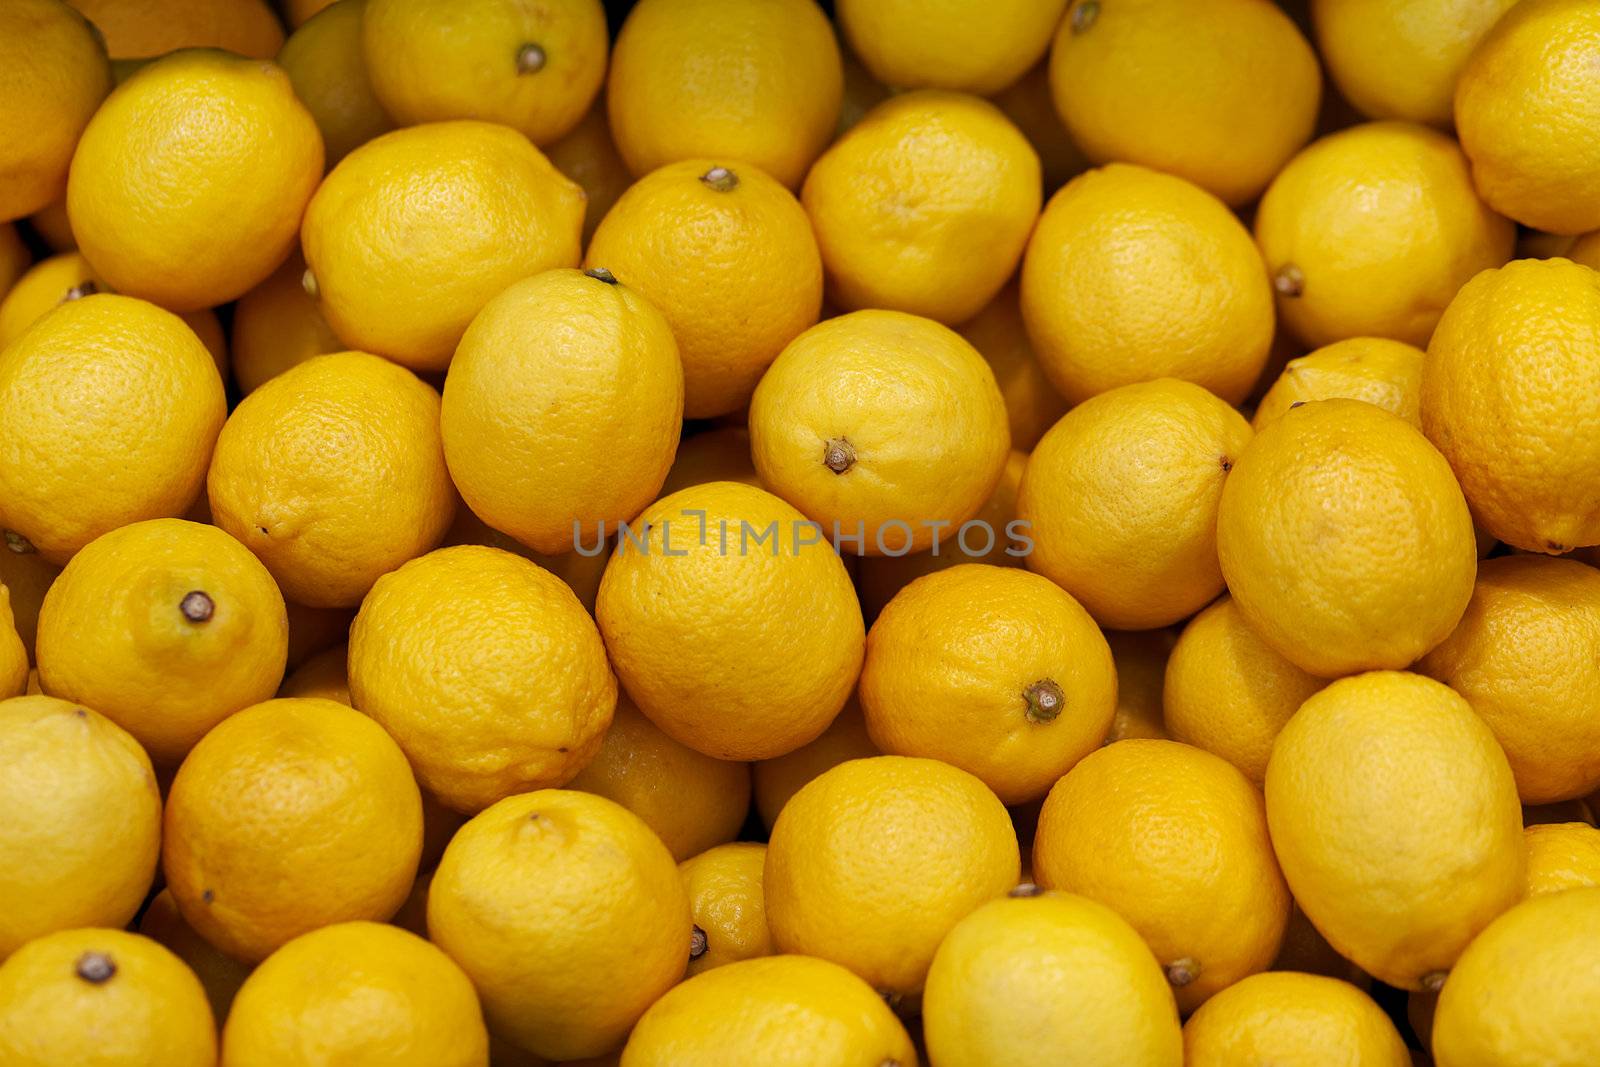 Lemons on the market counter - background by pzaxe